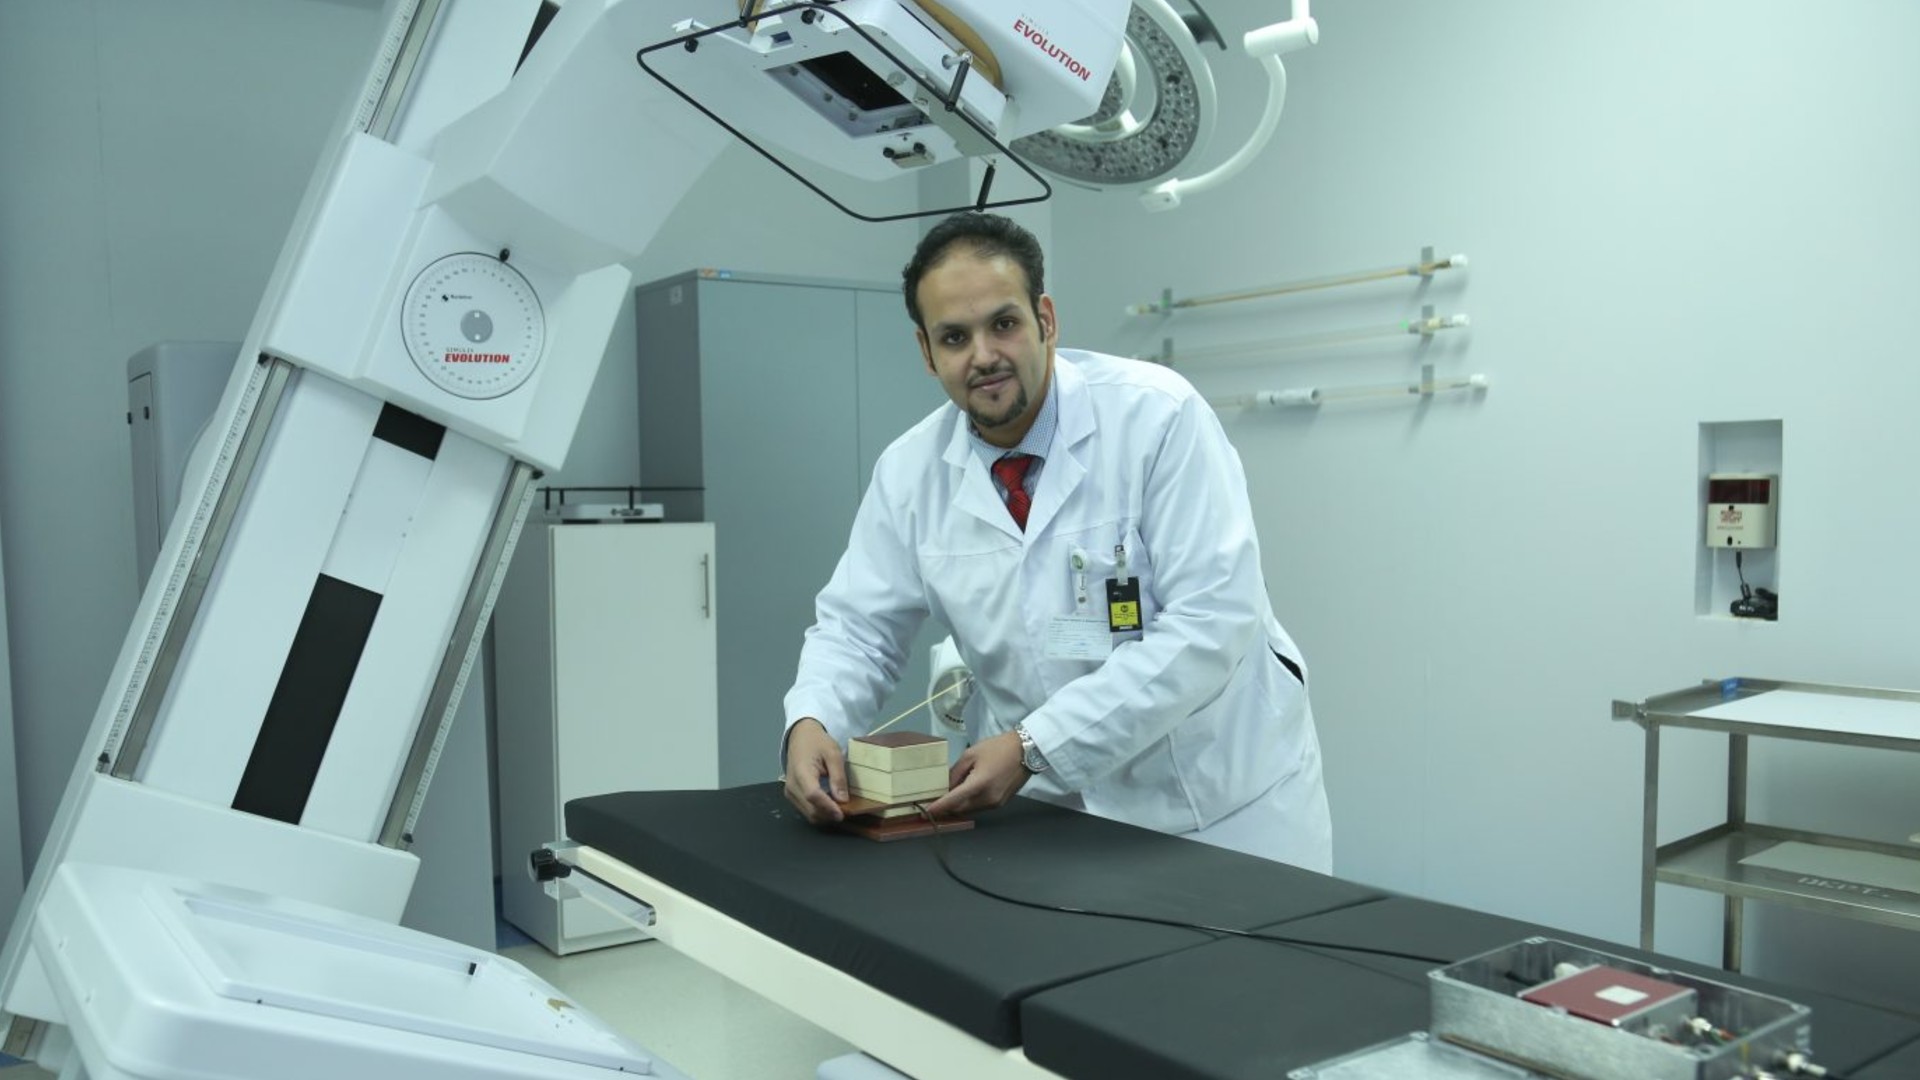 Centre for Medical Radiation Physics PhD candidate Mohammed Al Towairqi